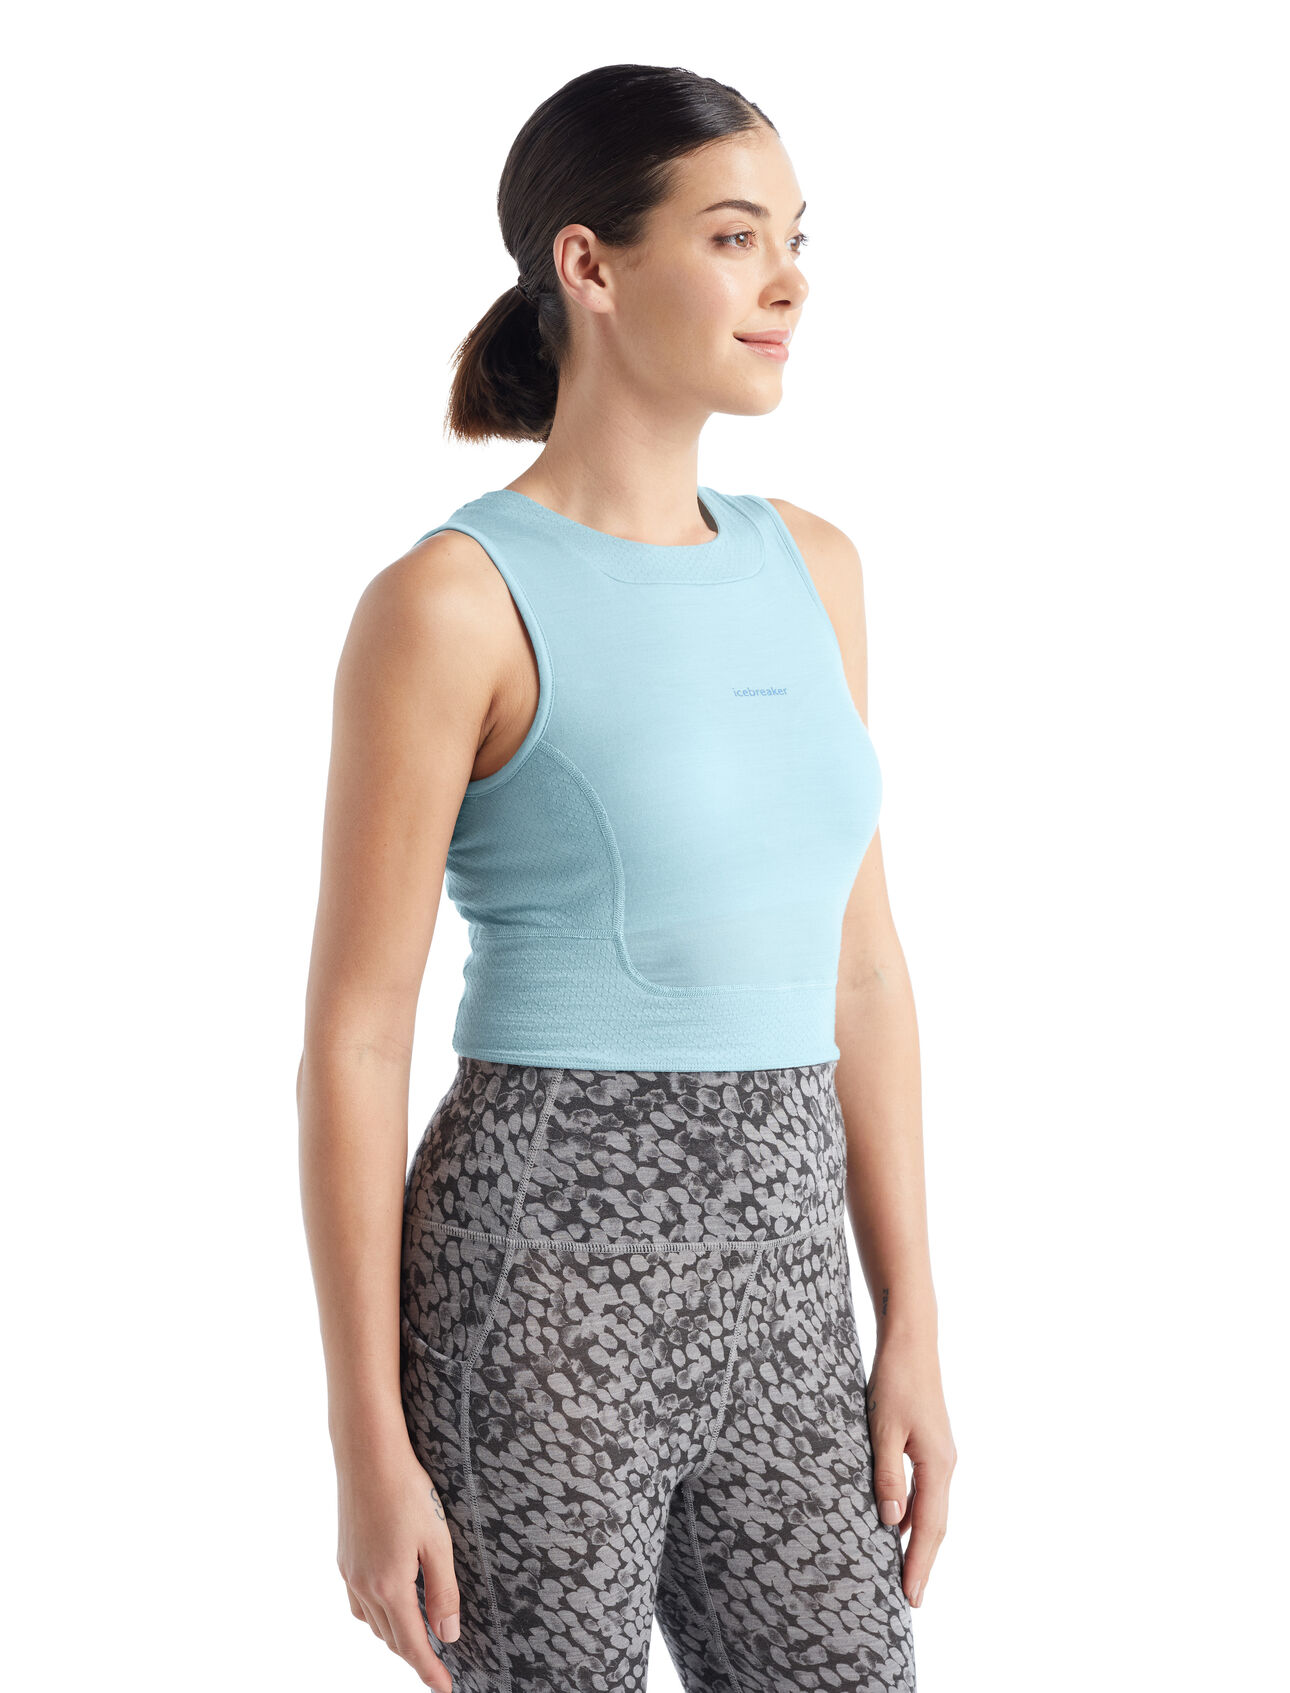 Womens ZoneKnit™ Merino Cropped Bra-Tank Our most breathable, lightweight top for high-output activities, the ZoneKnit™ Cropped Bra-Tank features a body-mapped combination of Cool-Lite merino jersey and ultra-breathable eyelet mesh, with a built-in bra.